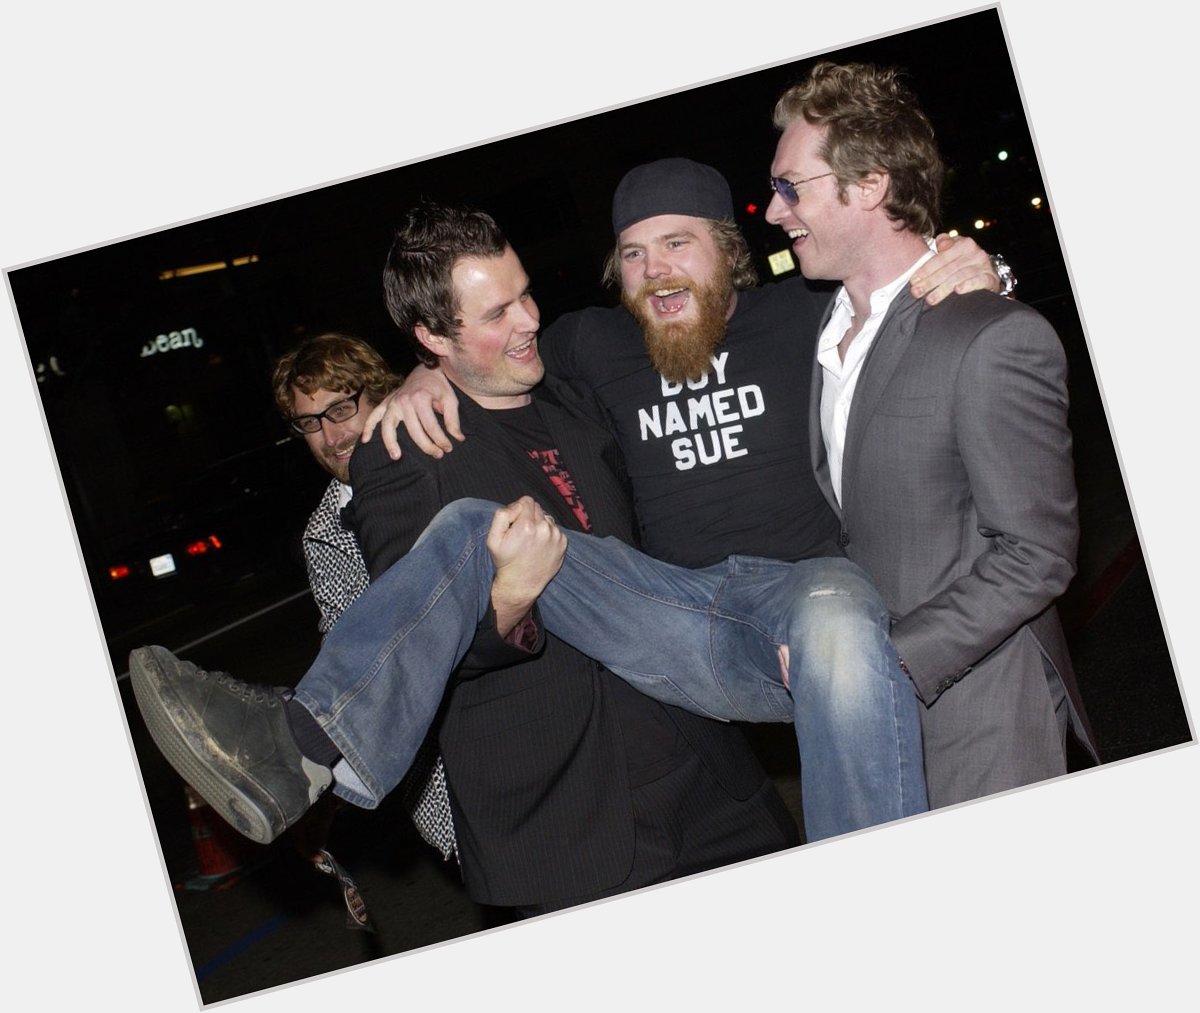 Happy belated bday to Ryan Dunn man. 